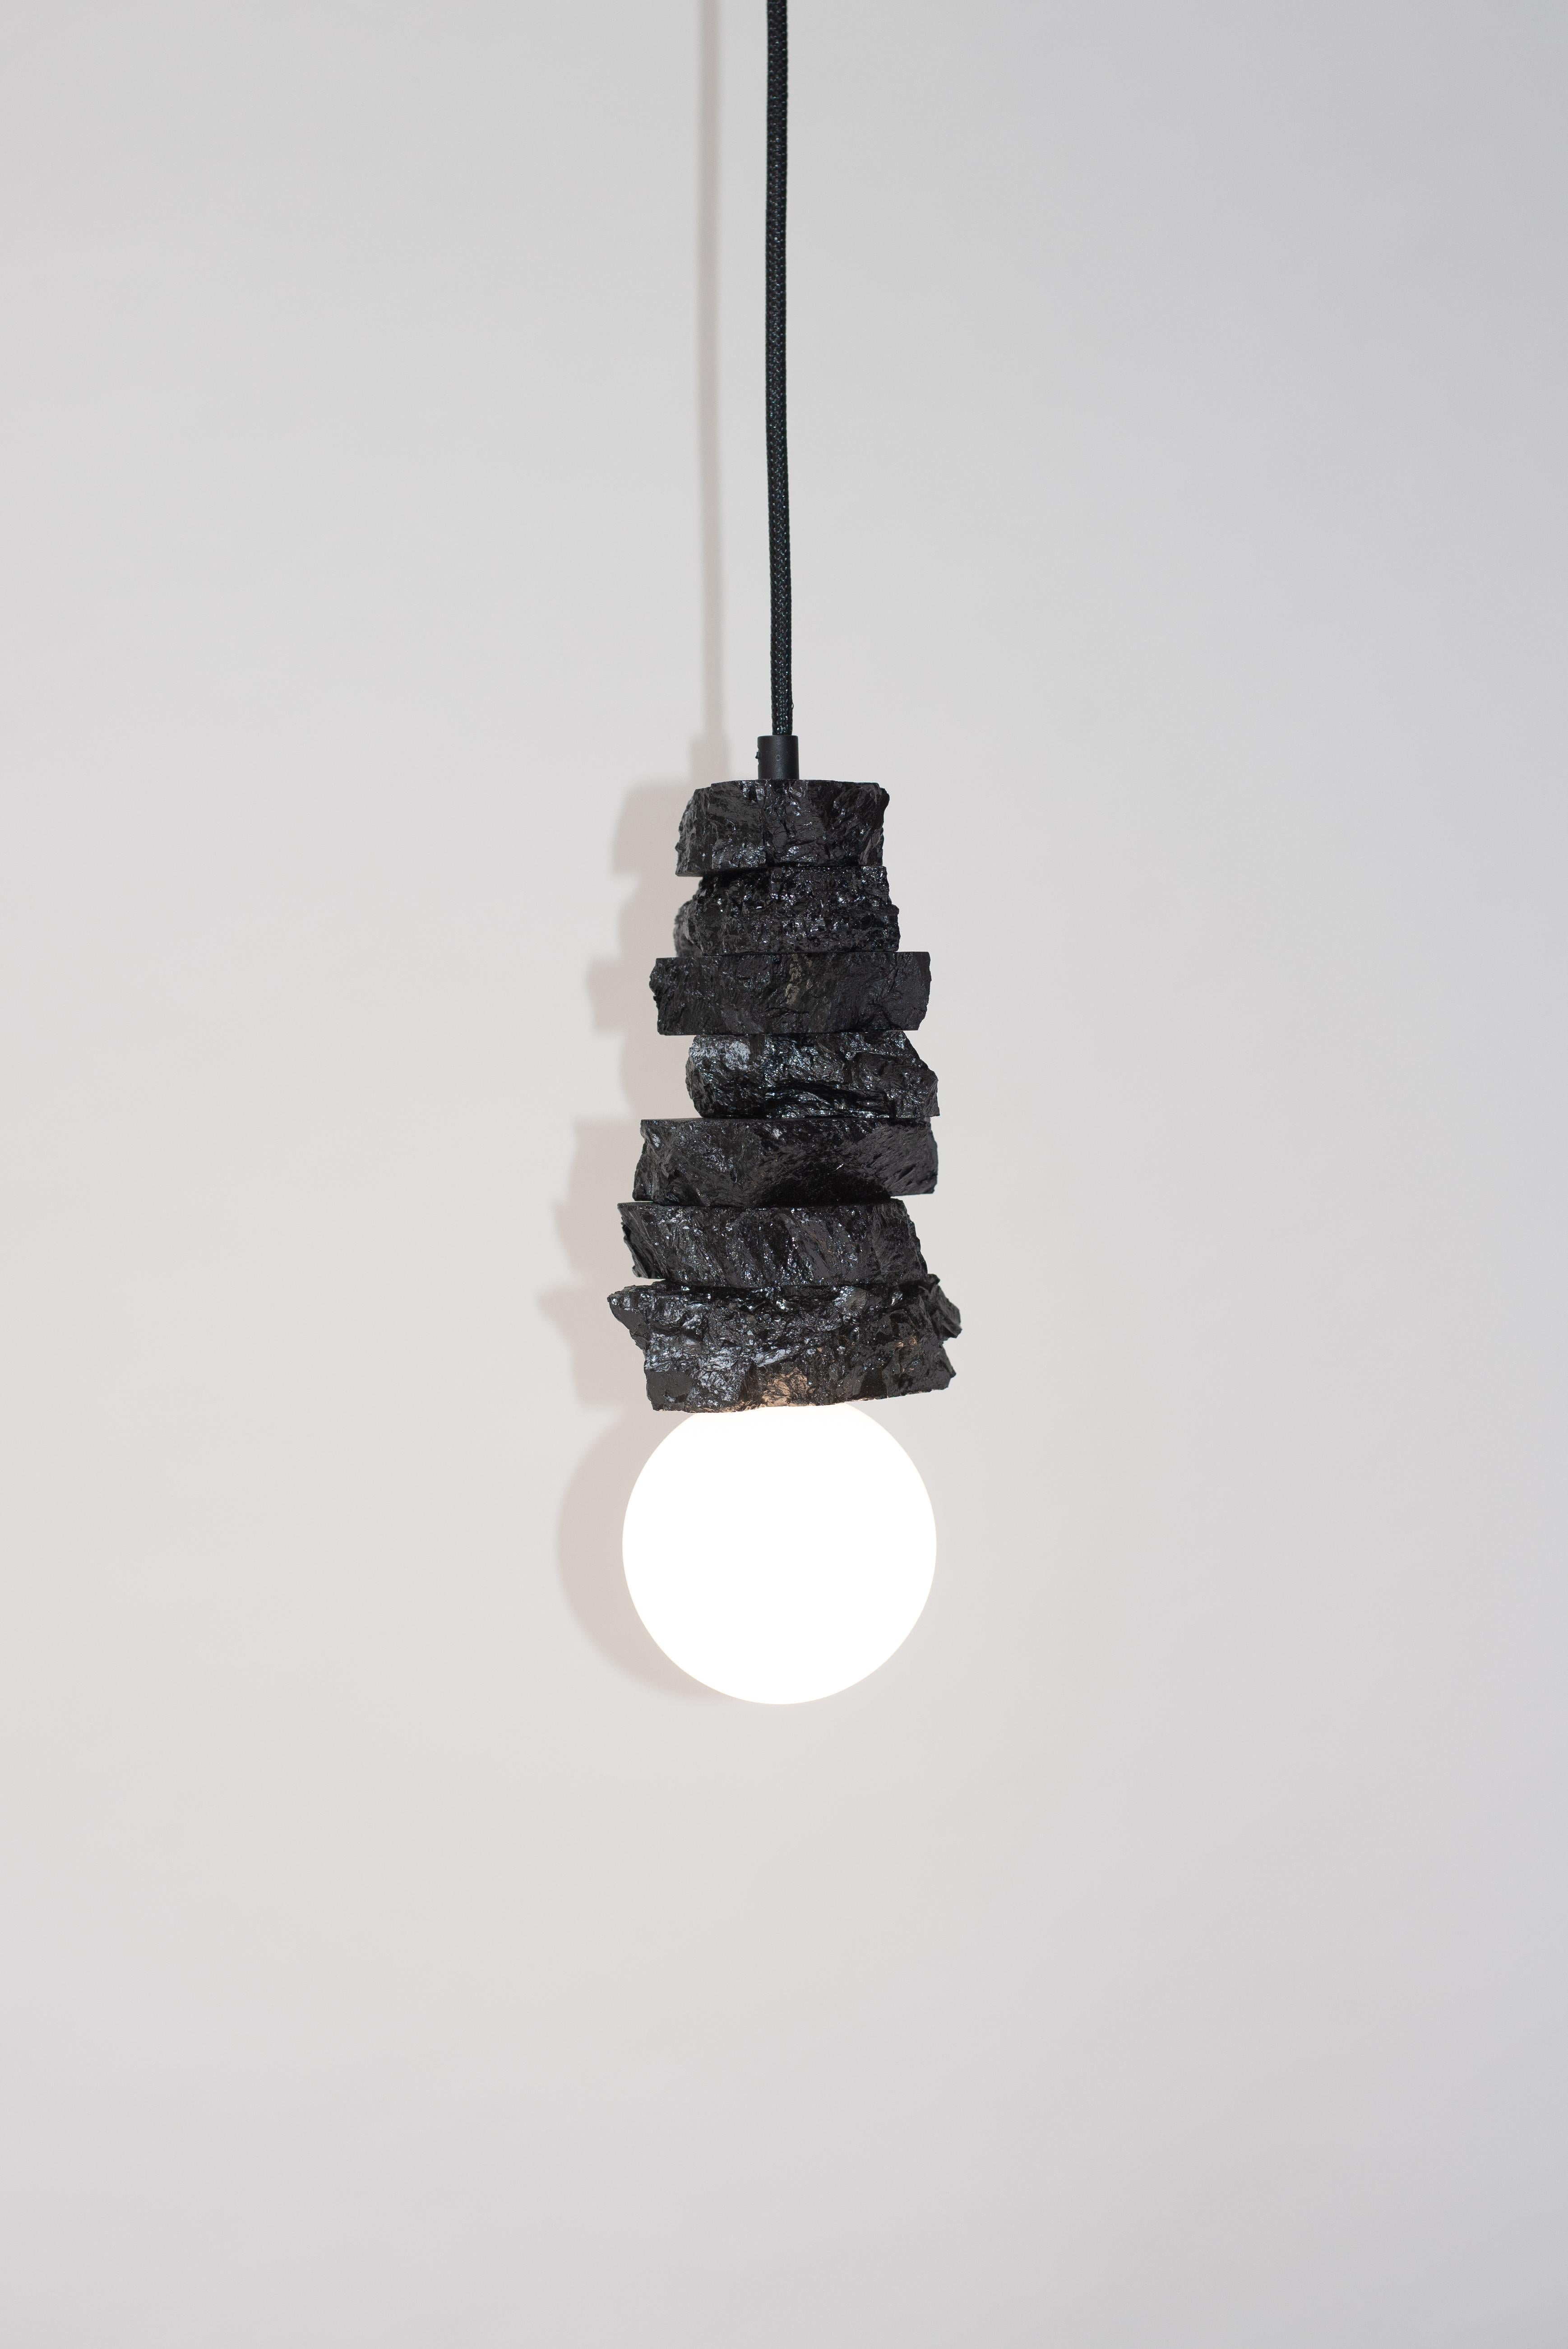 Pendant light 020 by Jesper Eriksson
Dimensions: D 20 x H 40 cm 
Materials: Anthracite coal, opal glass
Weight: 5 kg

All our lamps can be wired according to each country. If sold to the USA it will be wired for the USA for instance.

Jesper